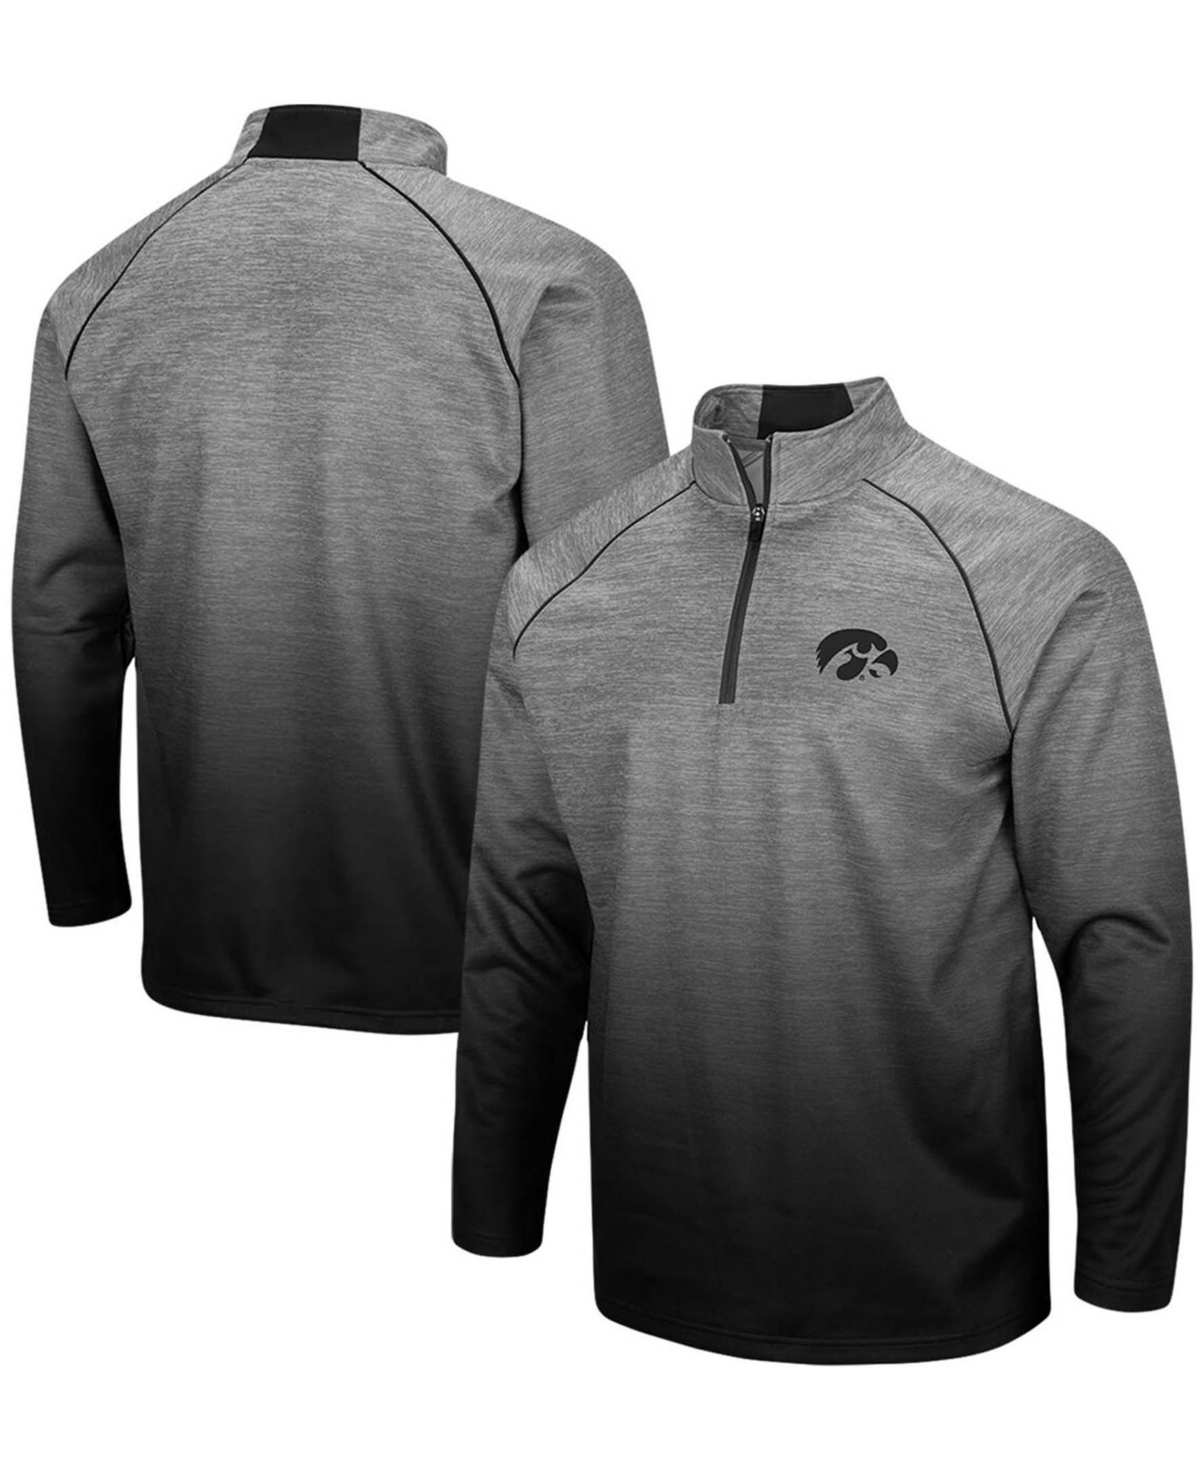 COLOSSEUM MEN'S HEATHER GRAY IOWA HAWKEYES SITWELL SUBLIMATED QUARTER-ZIP PULLOVER JACKET